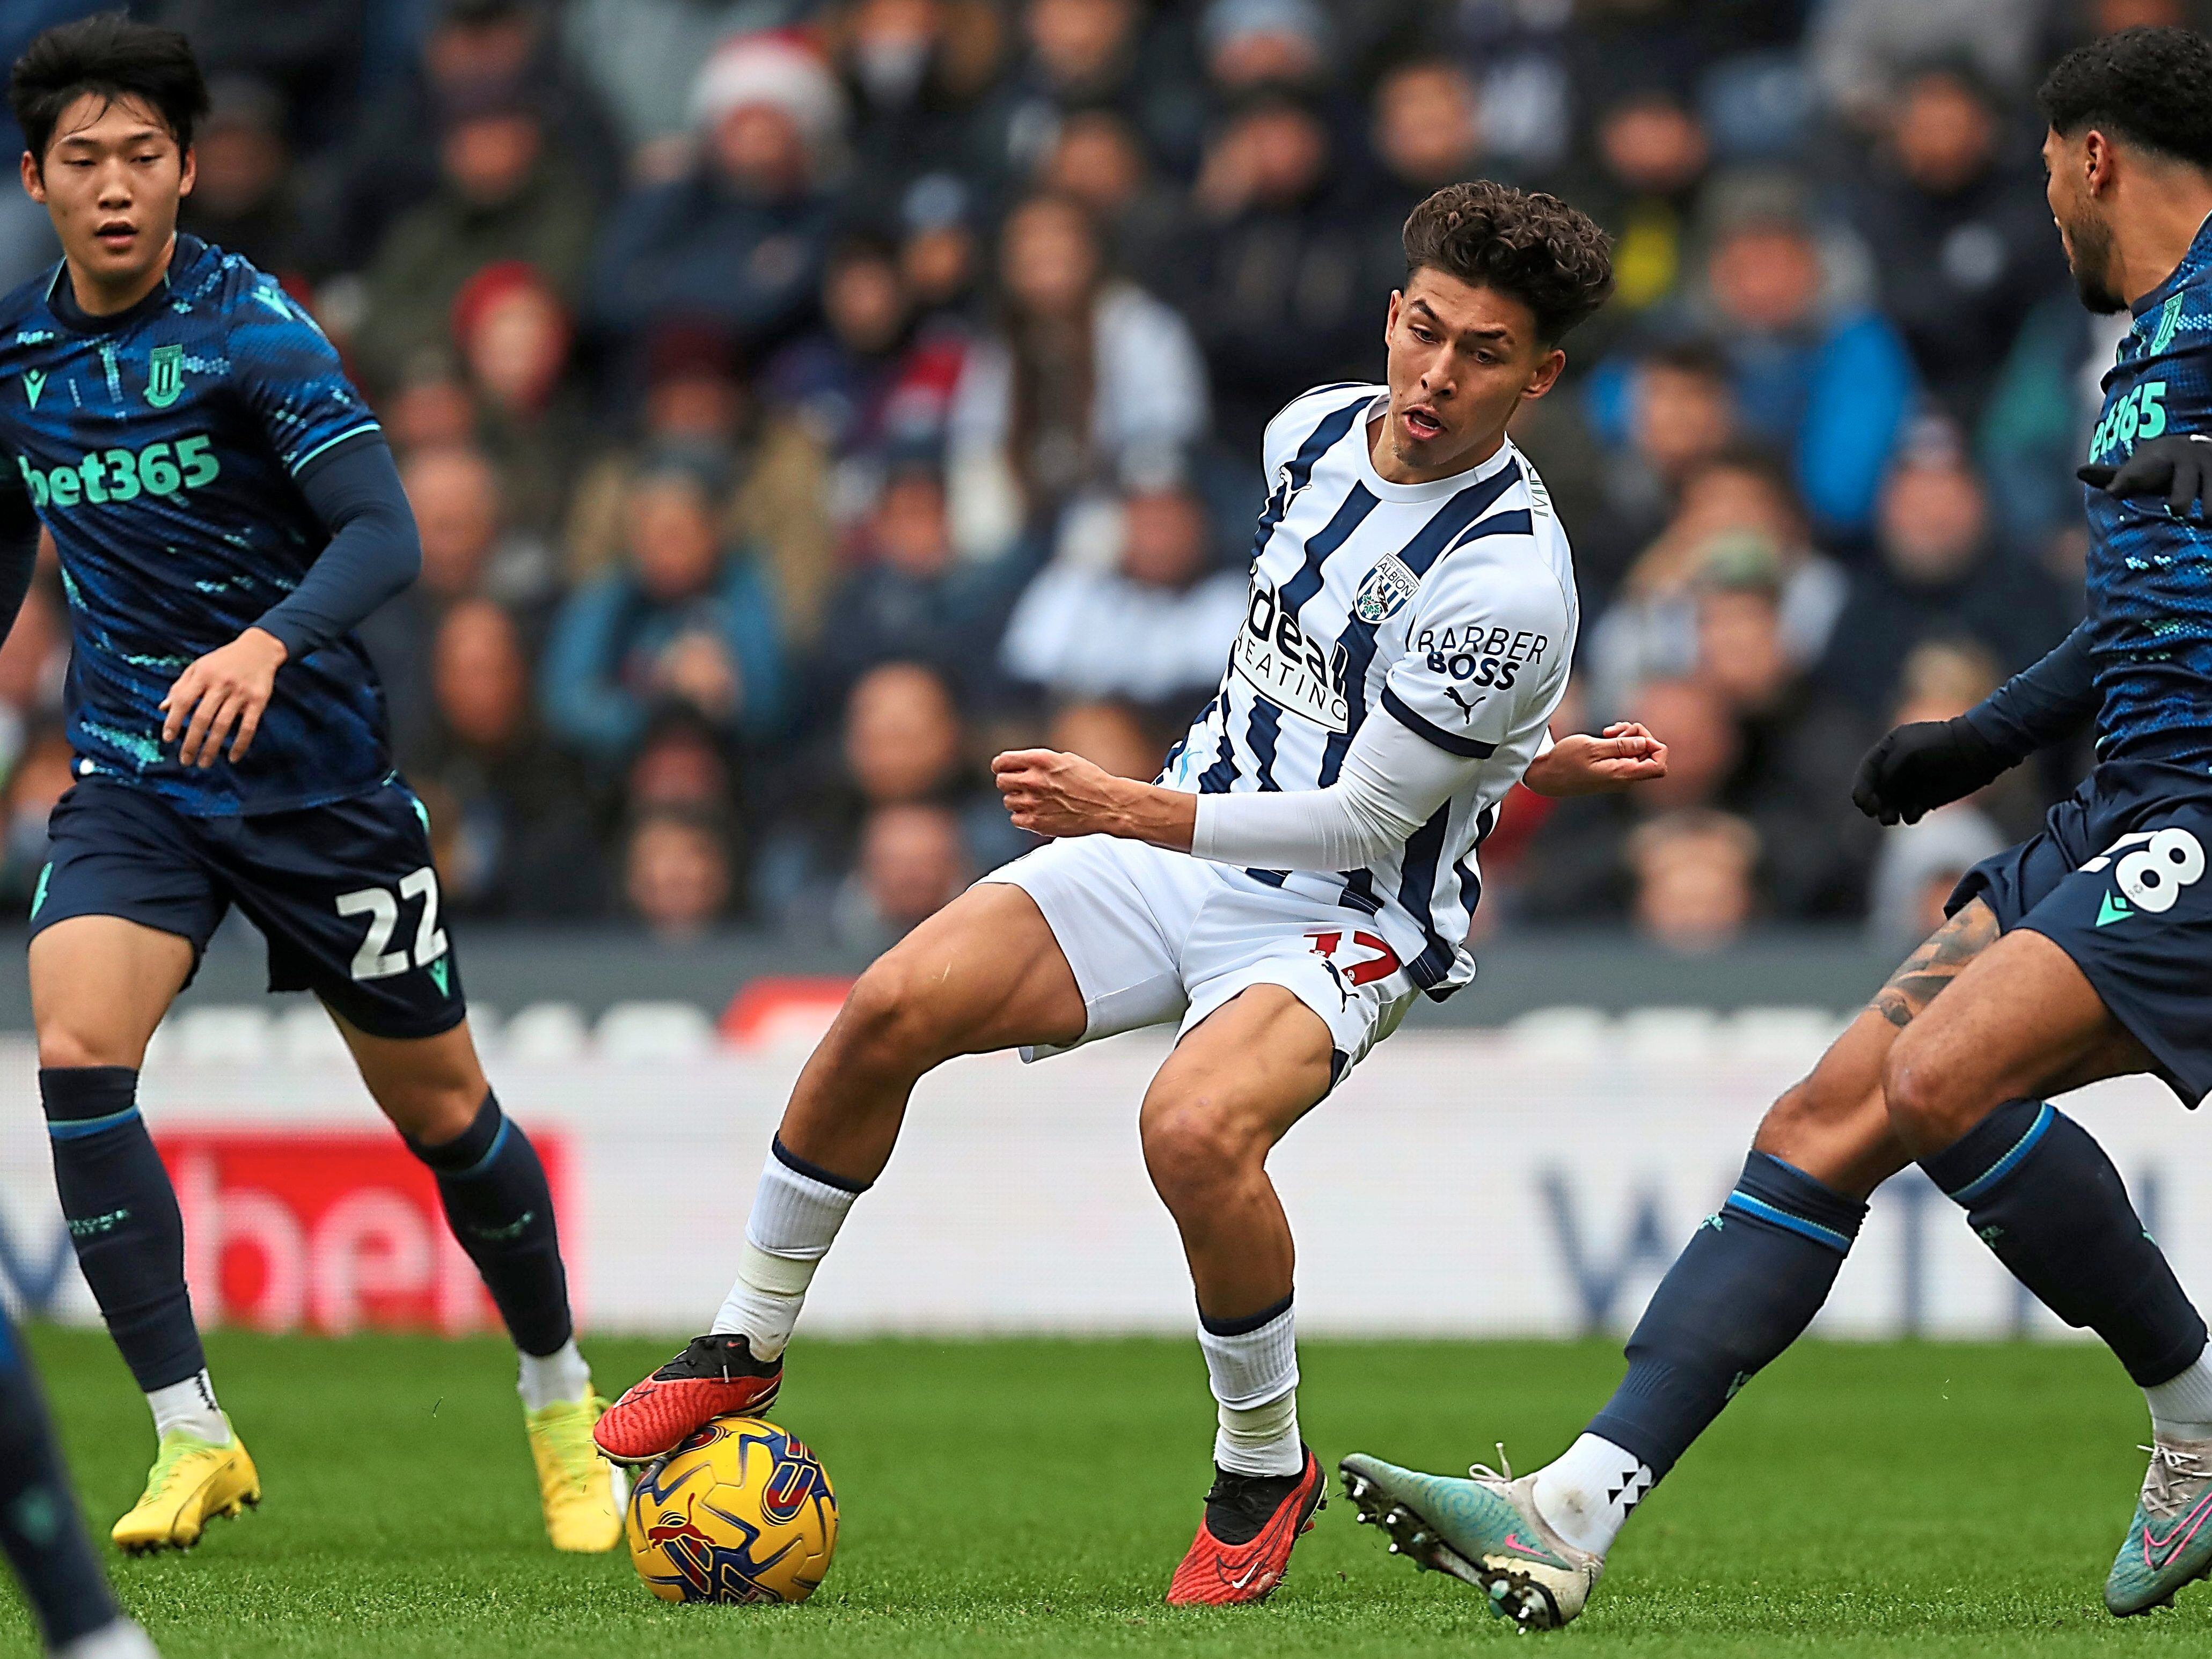 Carlos Corberan wants to nurture more than just skill with West Brom loanee Jeremy Sarmiento